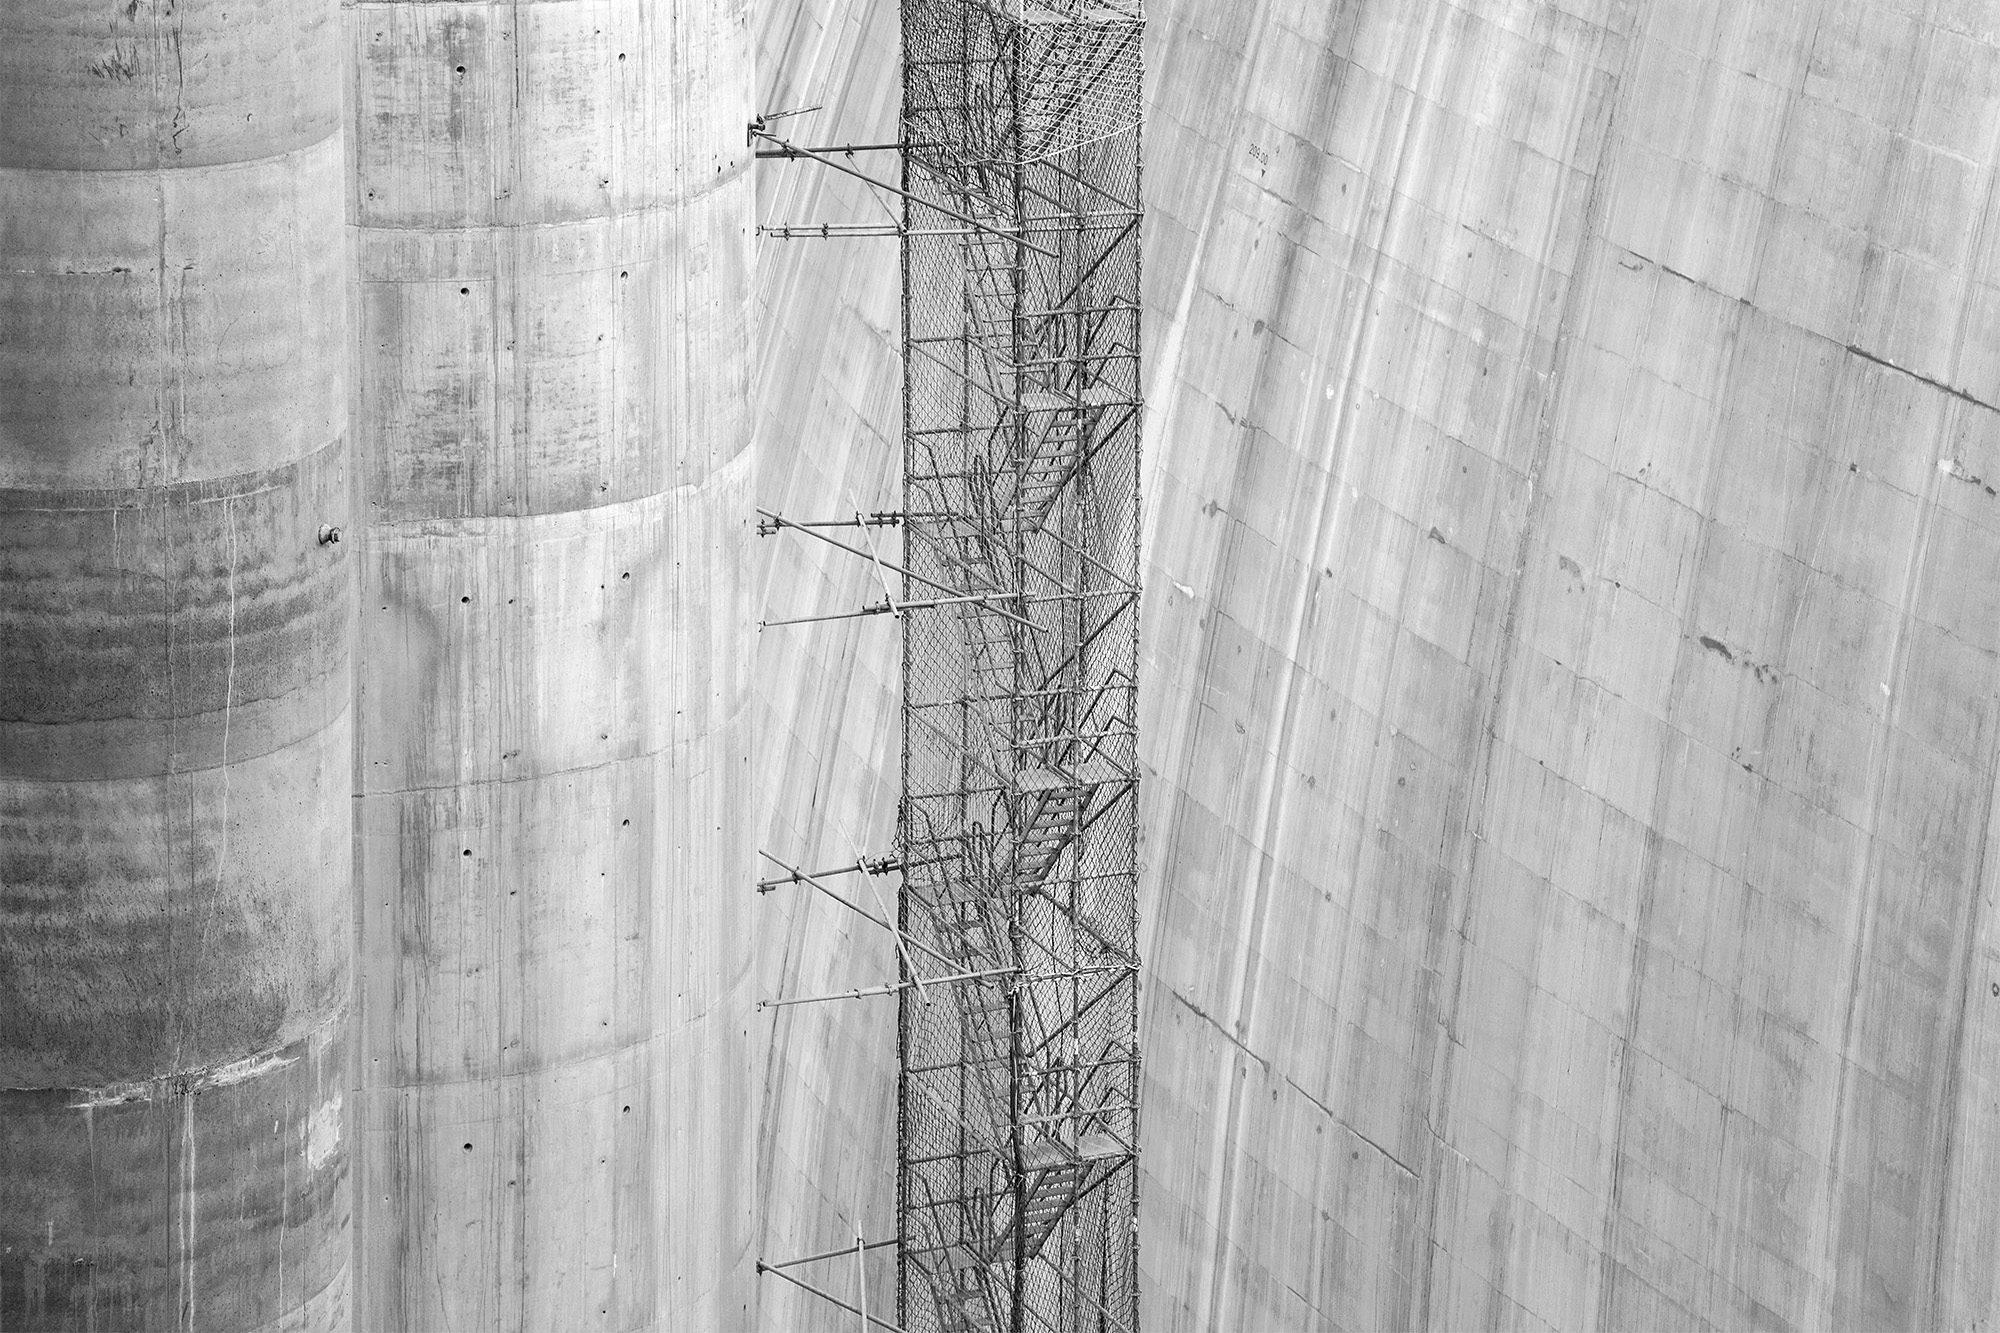 Carina Martins - Hub-structures - pillars and scaffold of Baixo Sabor dam being constructed